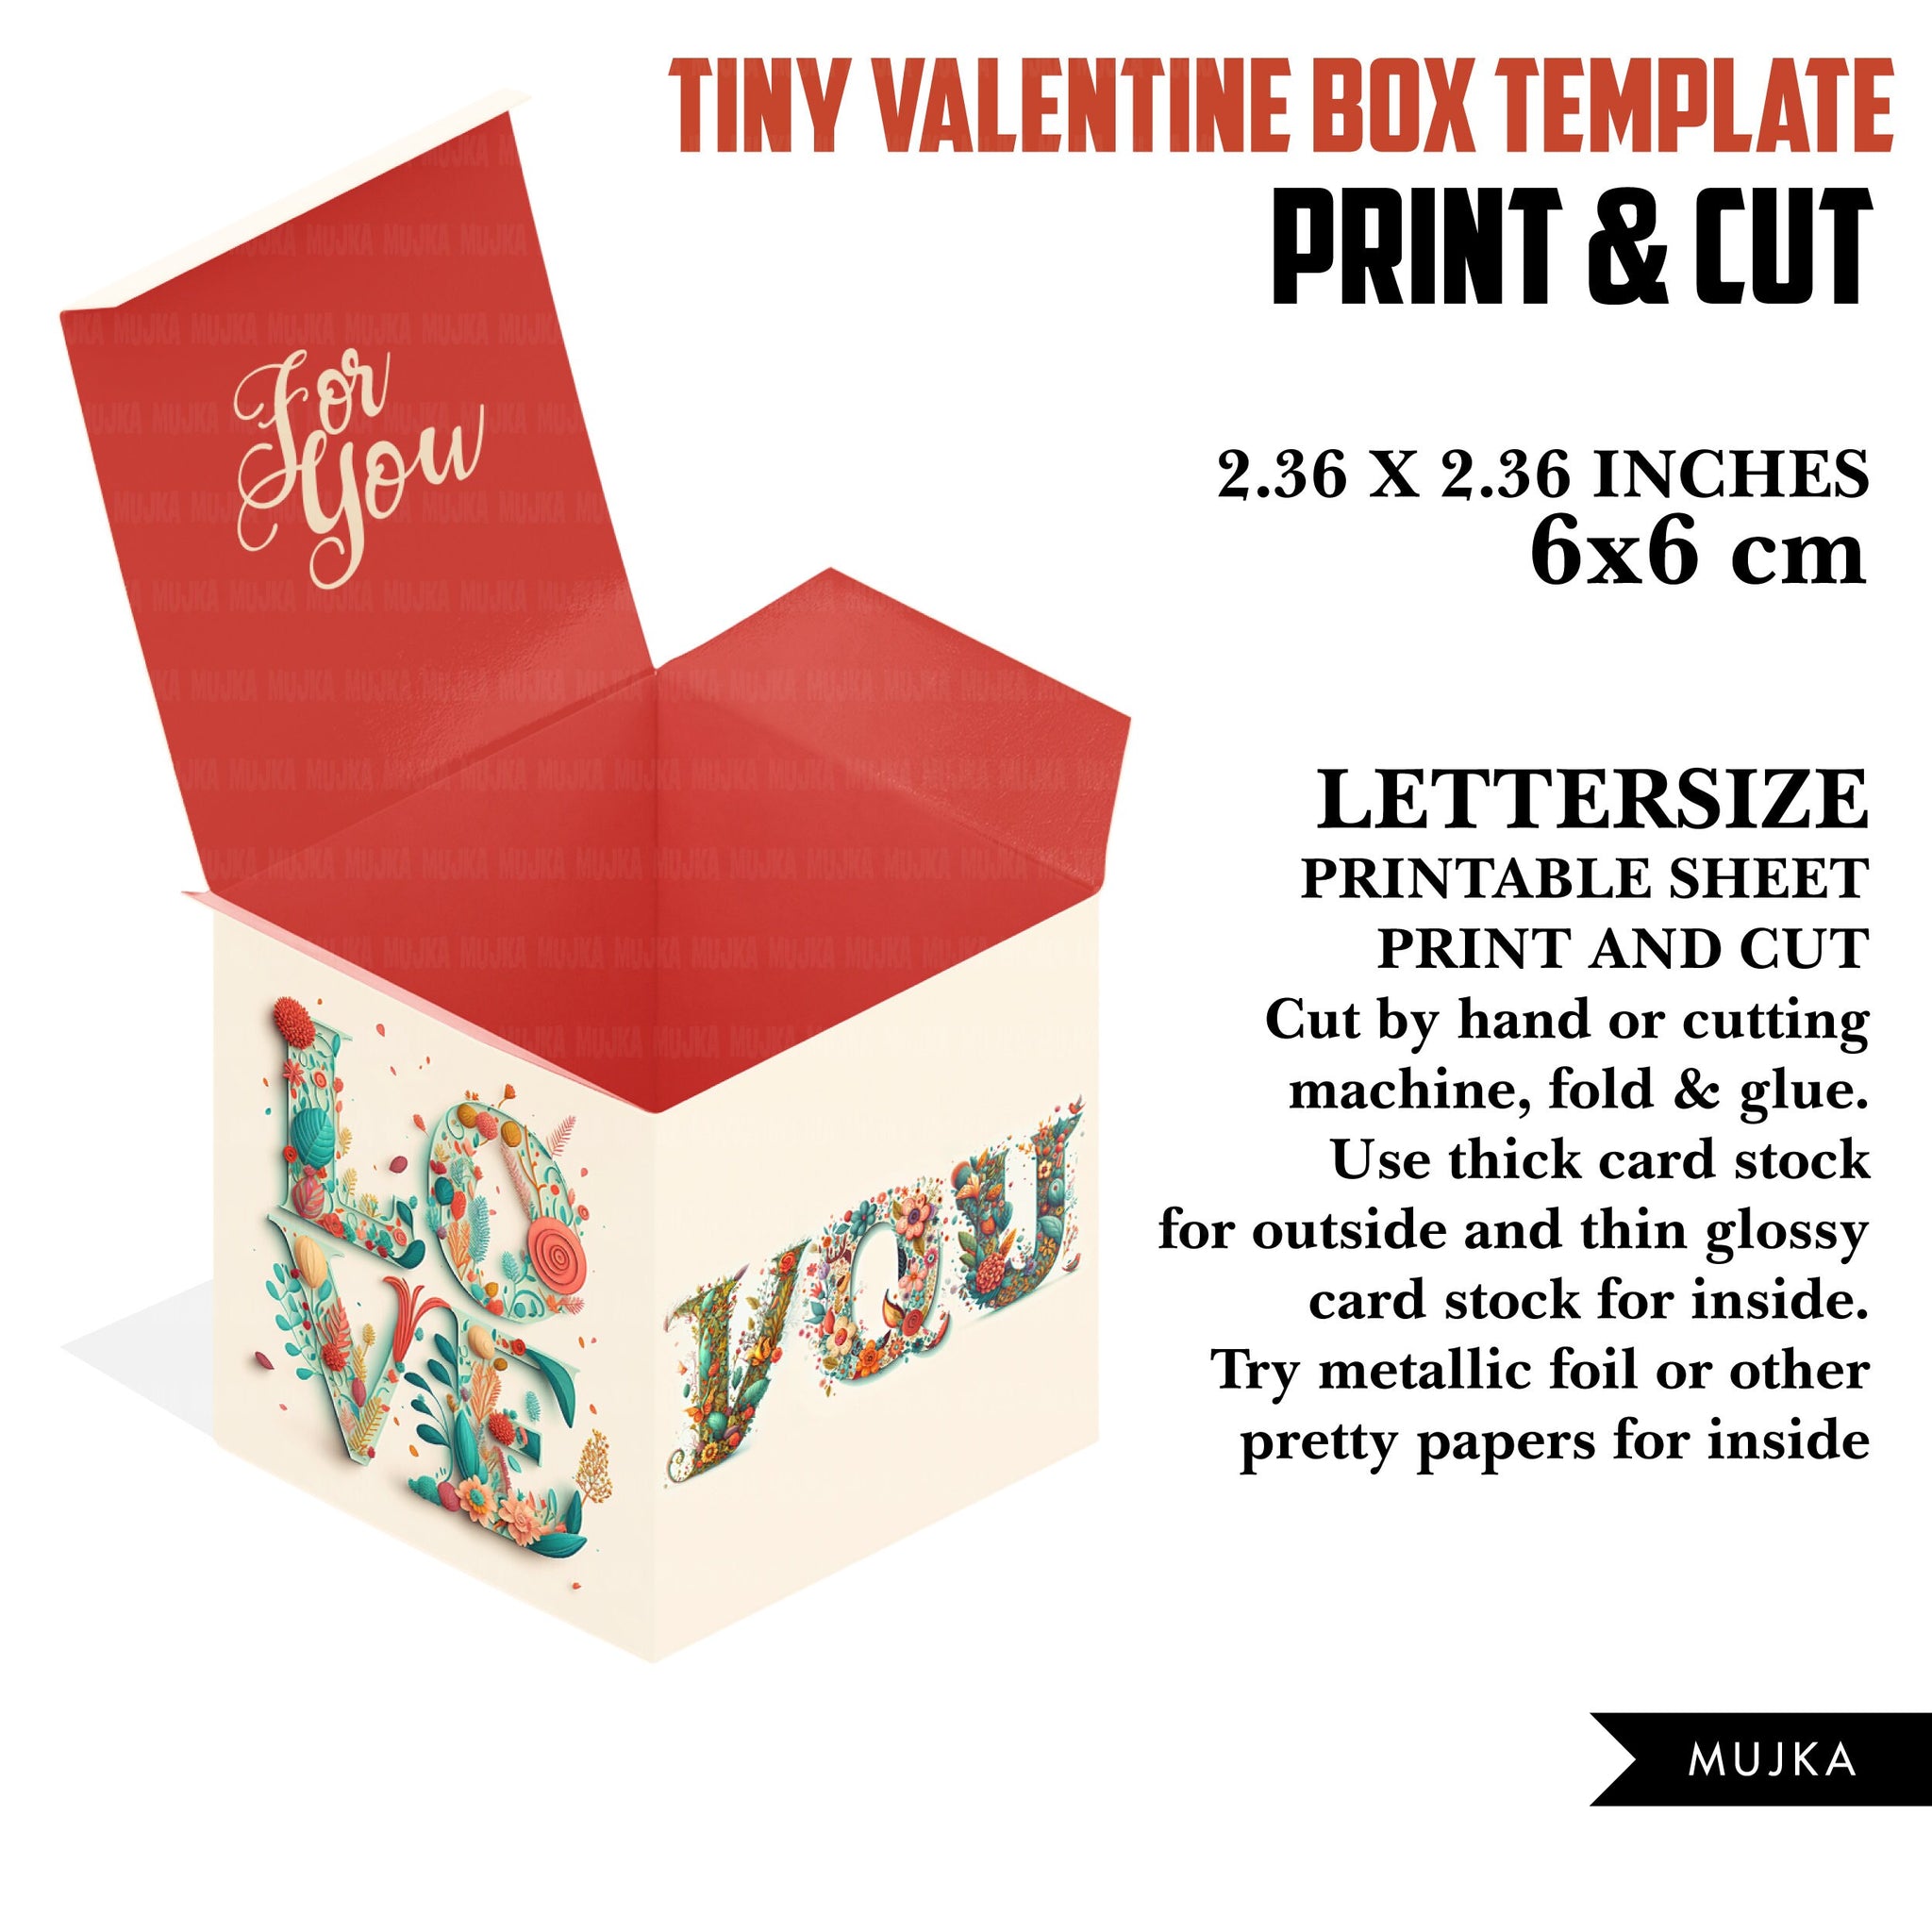 Valentine's Day gift box template, love gift box, gift box for her, printable gift box template, love png, gifts for her, print and cut box